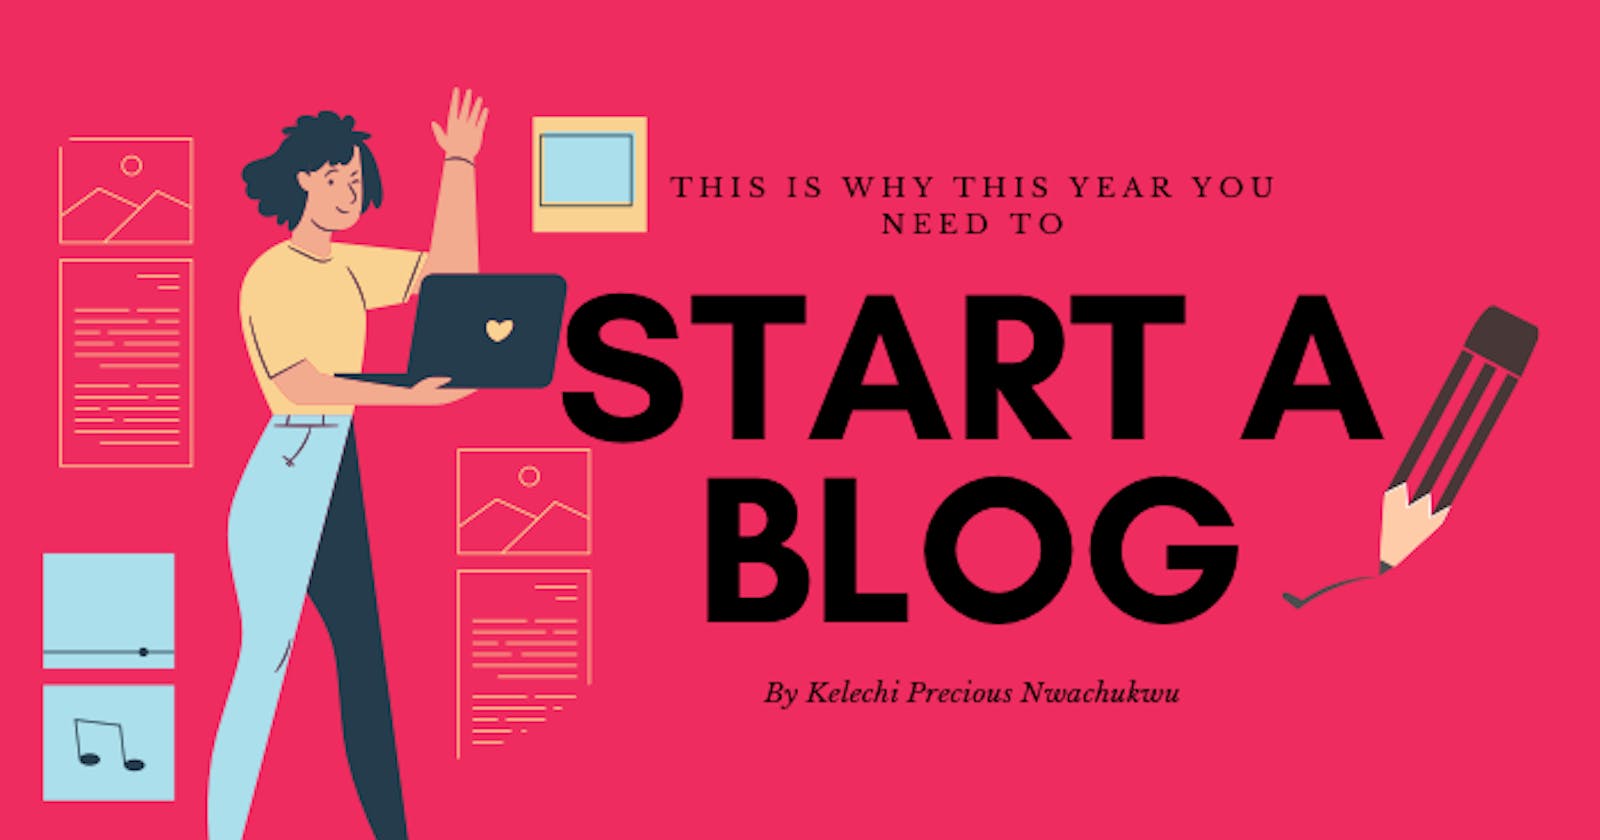 This is Why This Year You Need To Start A Blog